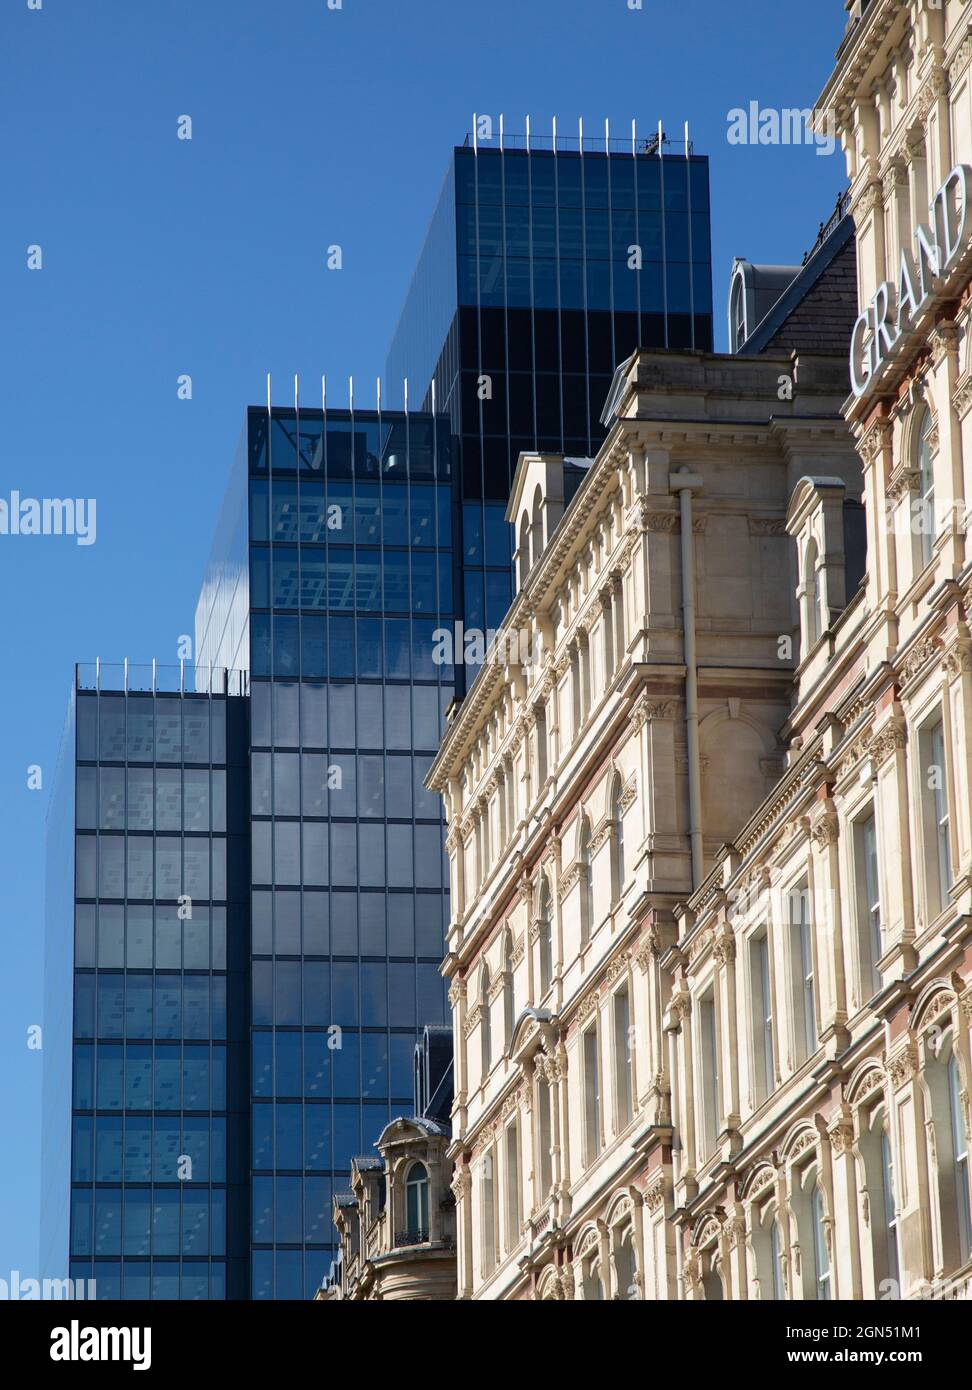 Old and new.  Classic architecture set against modern architecture in the centre of Birmingham, England. Stock Photo